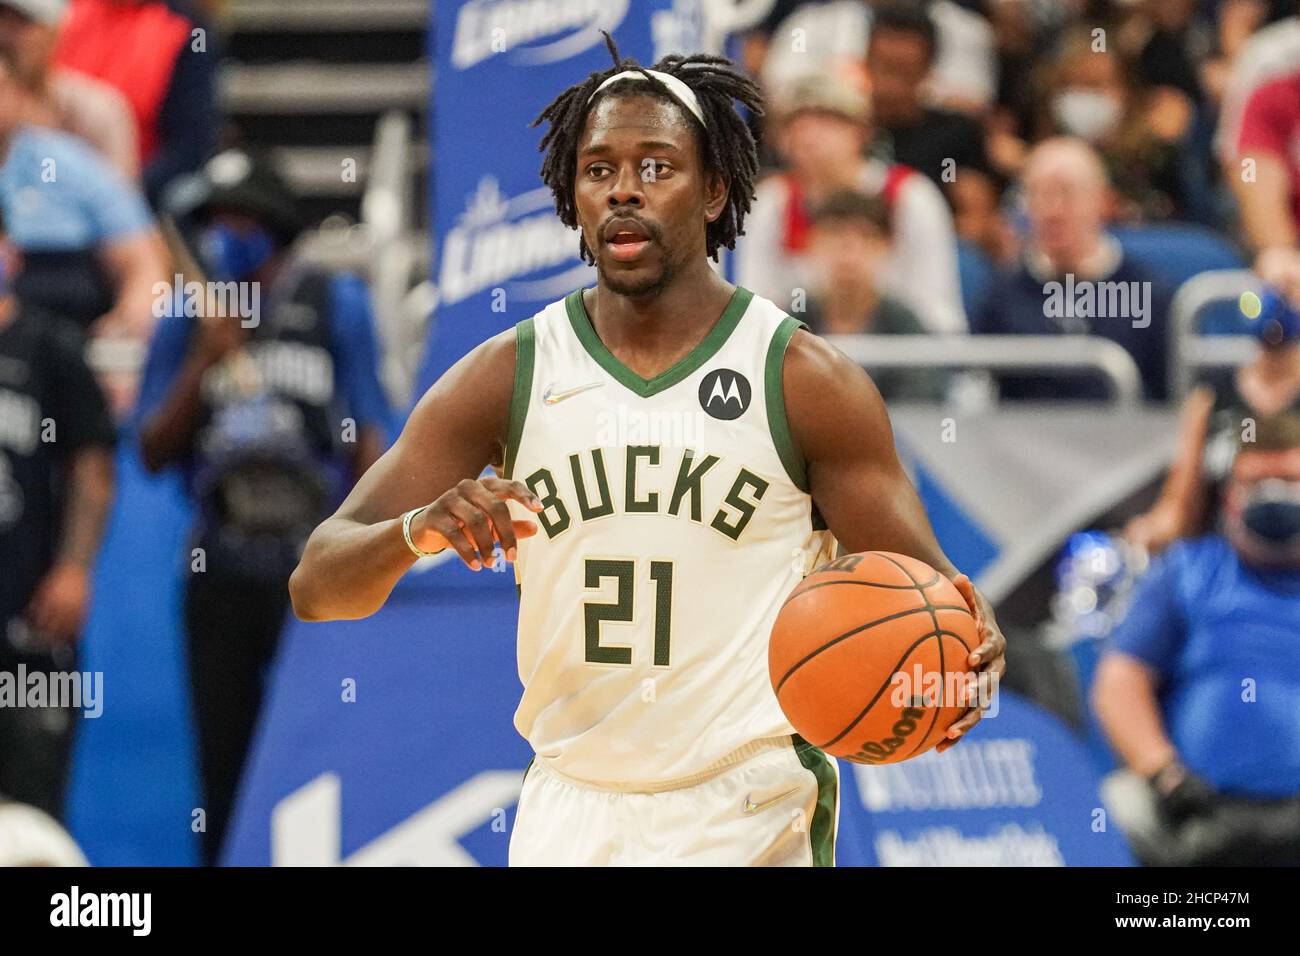 Pic of the Day: Jrue Holiday stars in Gremlins 4 - Interbasket